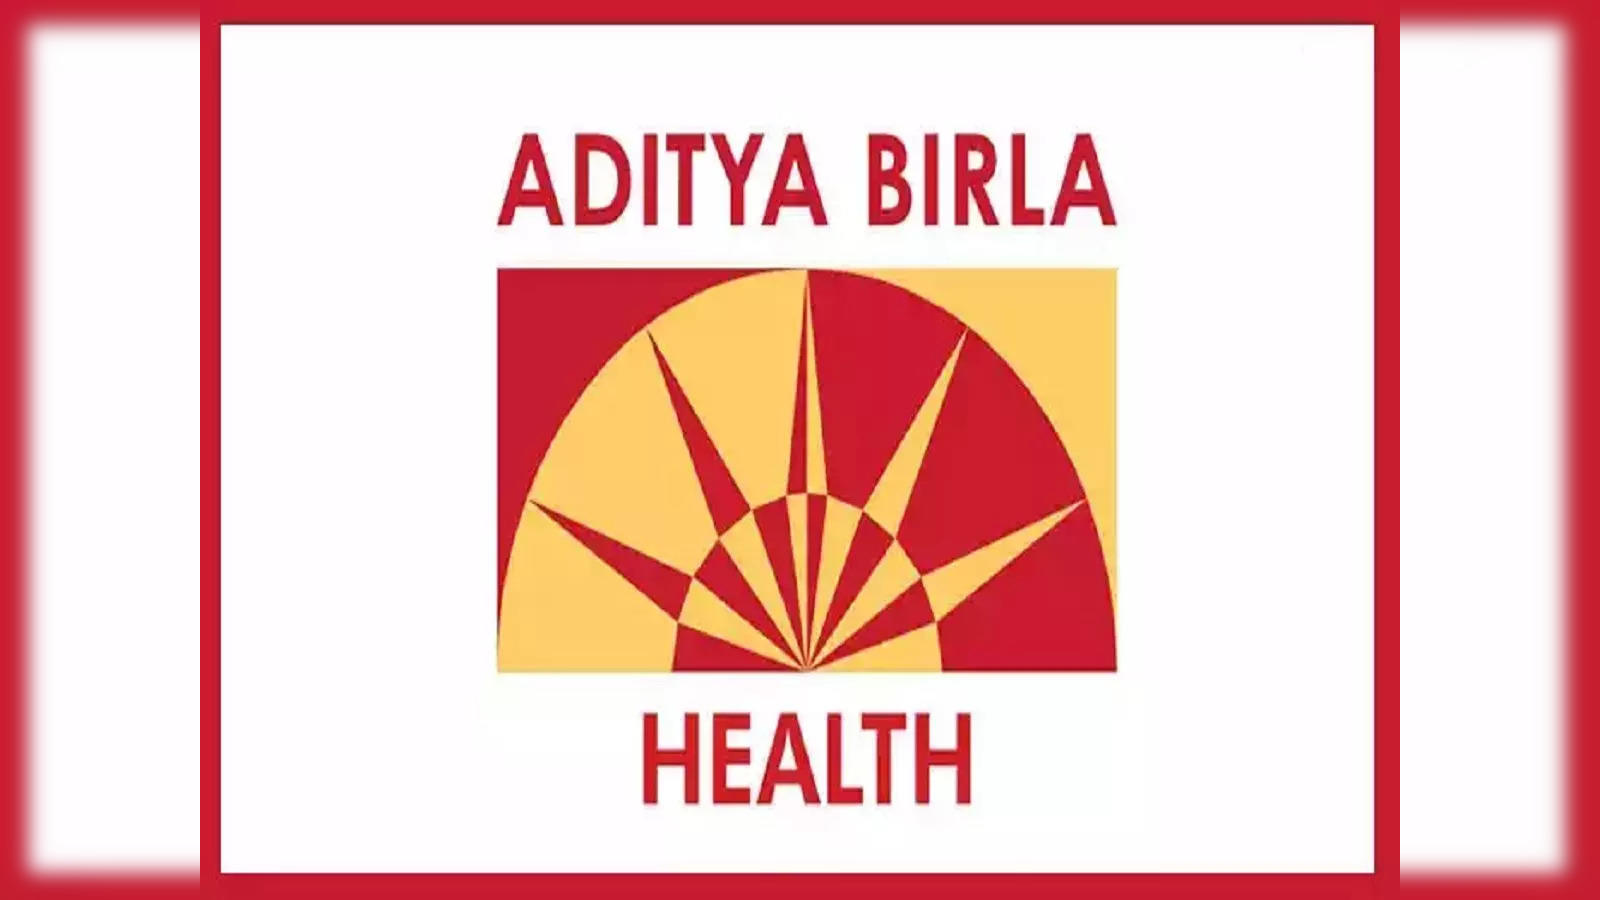 Apply For Aditya Birla Home Loans. About Us Get Aditya Birla Finance  Home/Housing Loan with lowest interest rates and instant approval from  Logintoloans.com. - ppt download